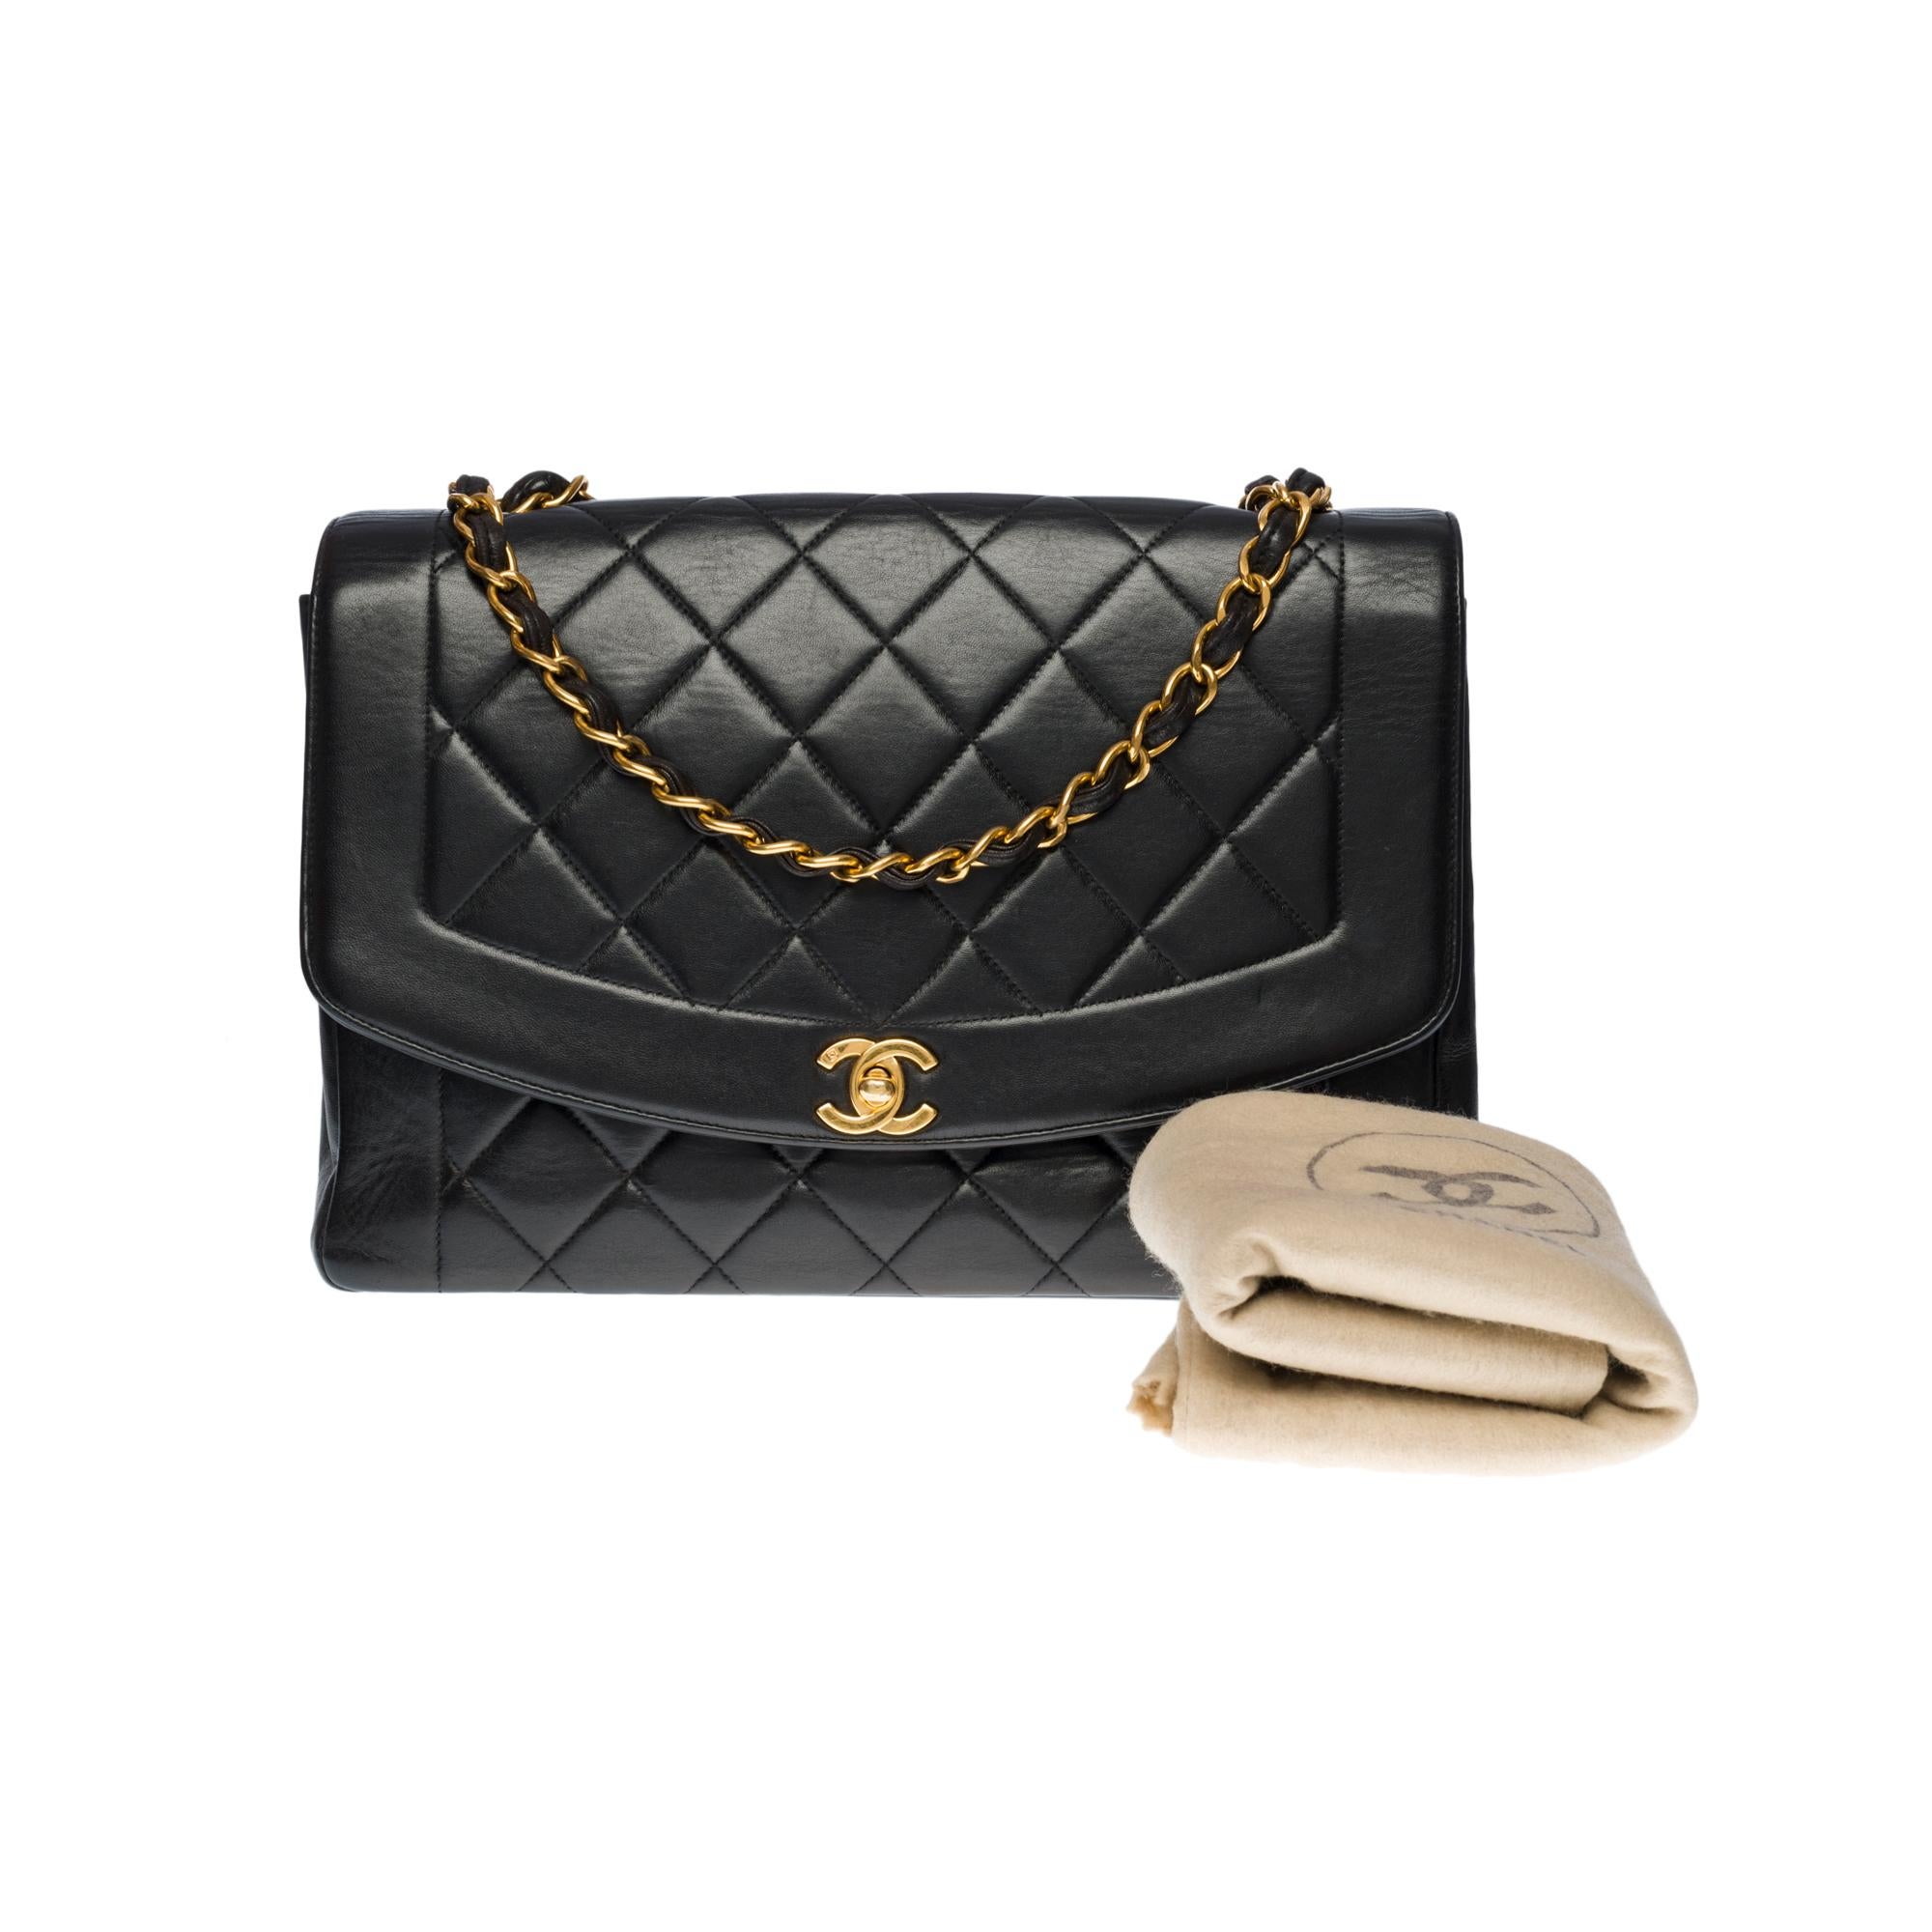 Rare Chanel Diana GM Shoulder bag in black quilted lambskin leather, GHW 4